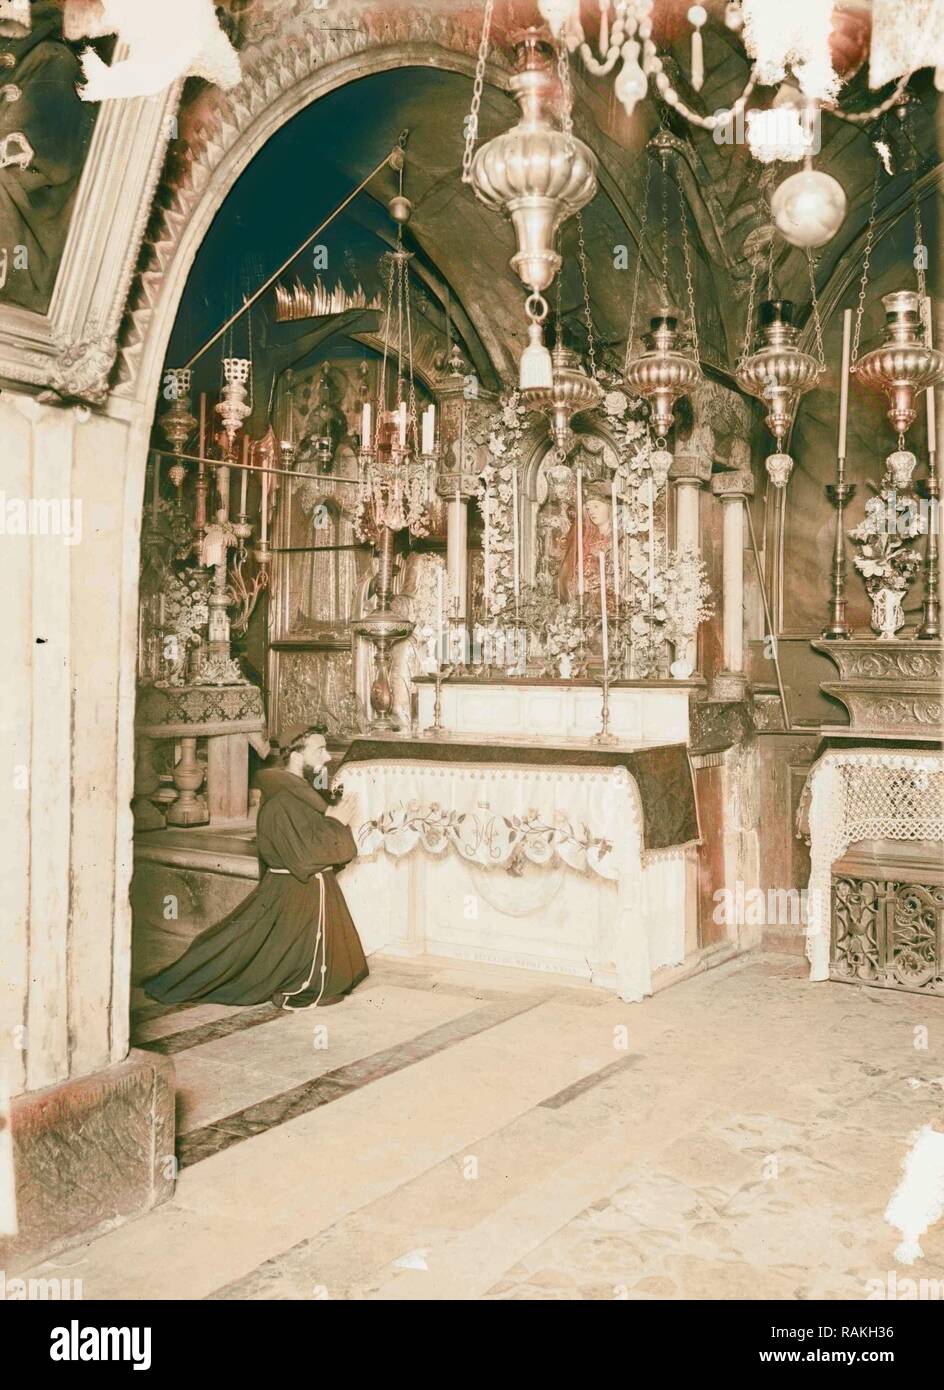 Via Dolorosa, beginning at St. Stephen's Gate Thirteenth Station of the Cross. Photo shows the Thirteenth Station of reimagined Stock Photo